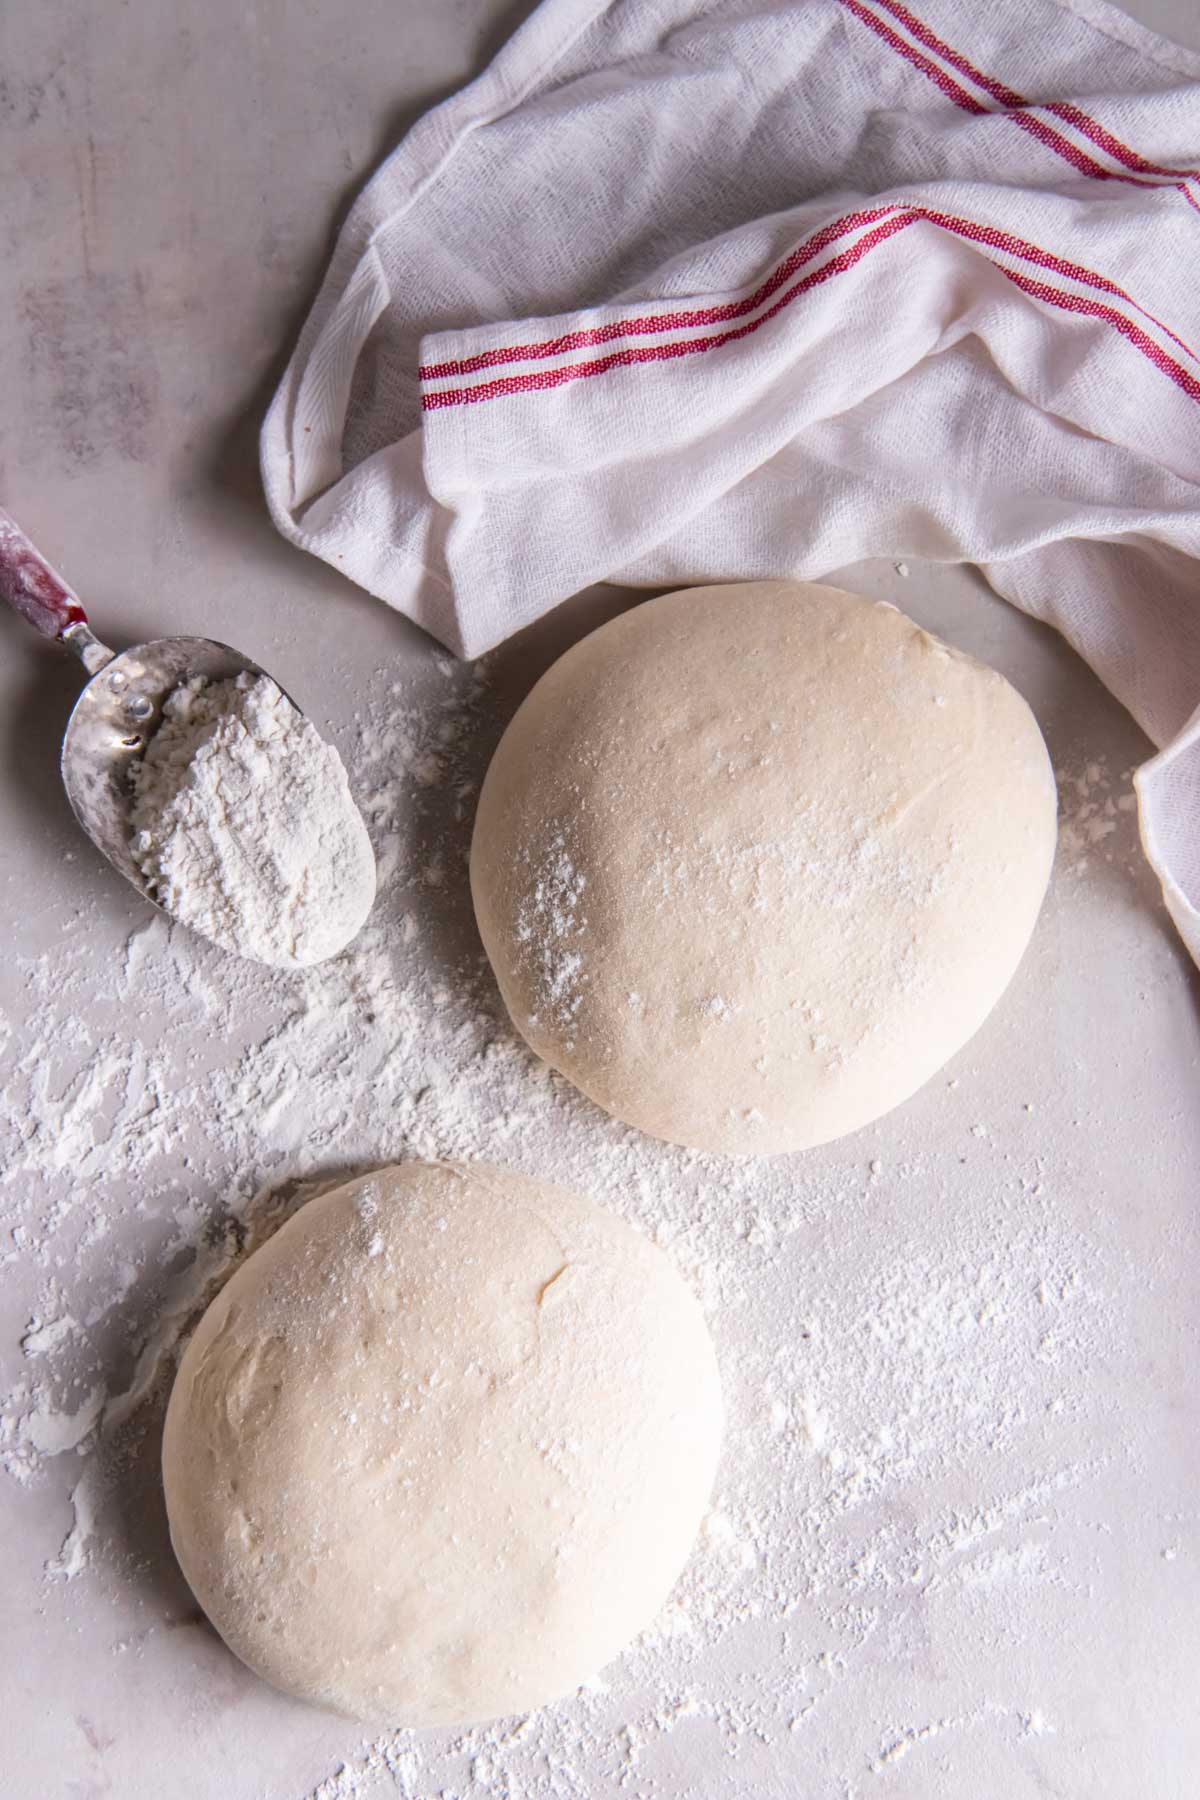 Two balls of pizza dough on a floured work surface.